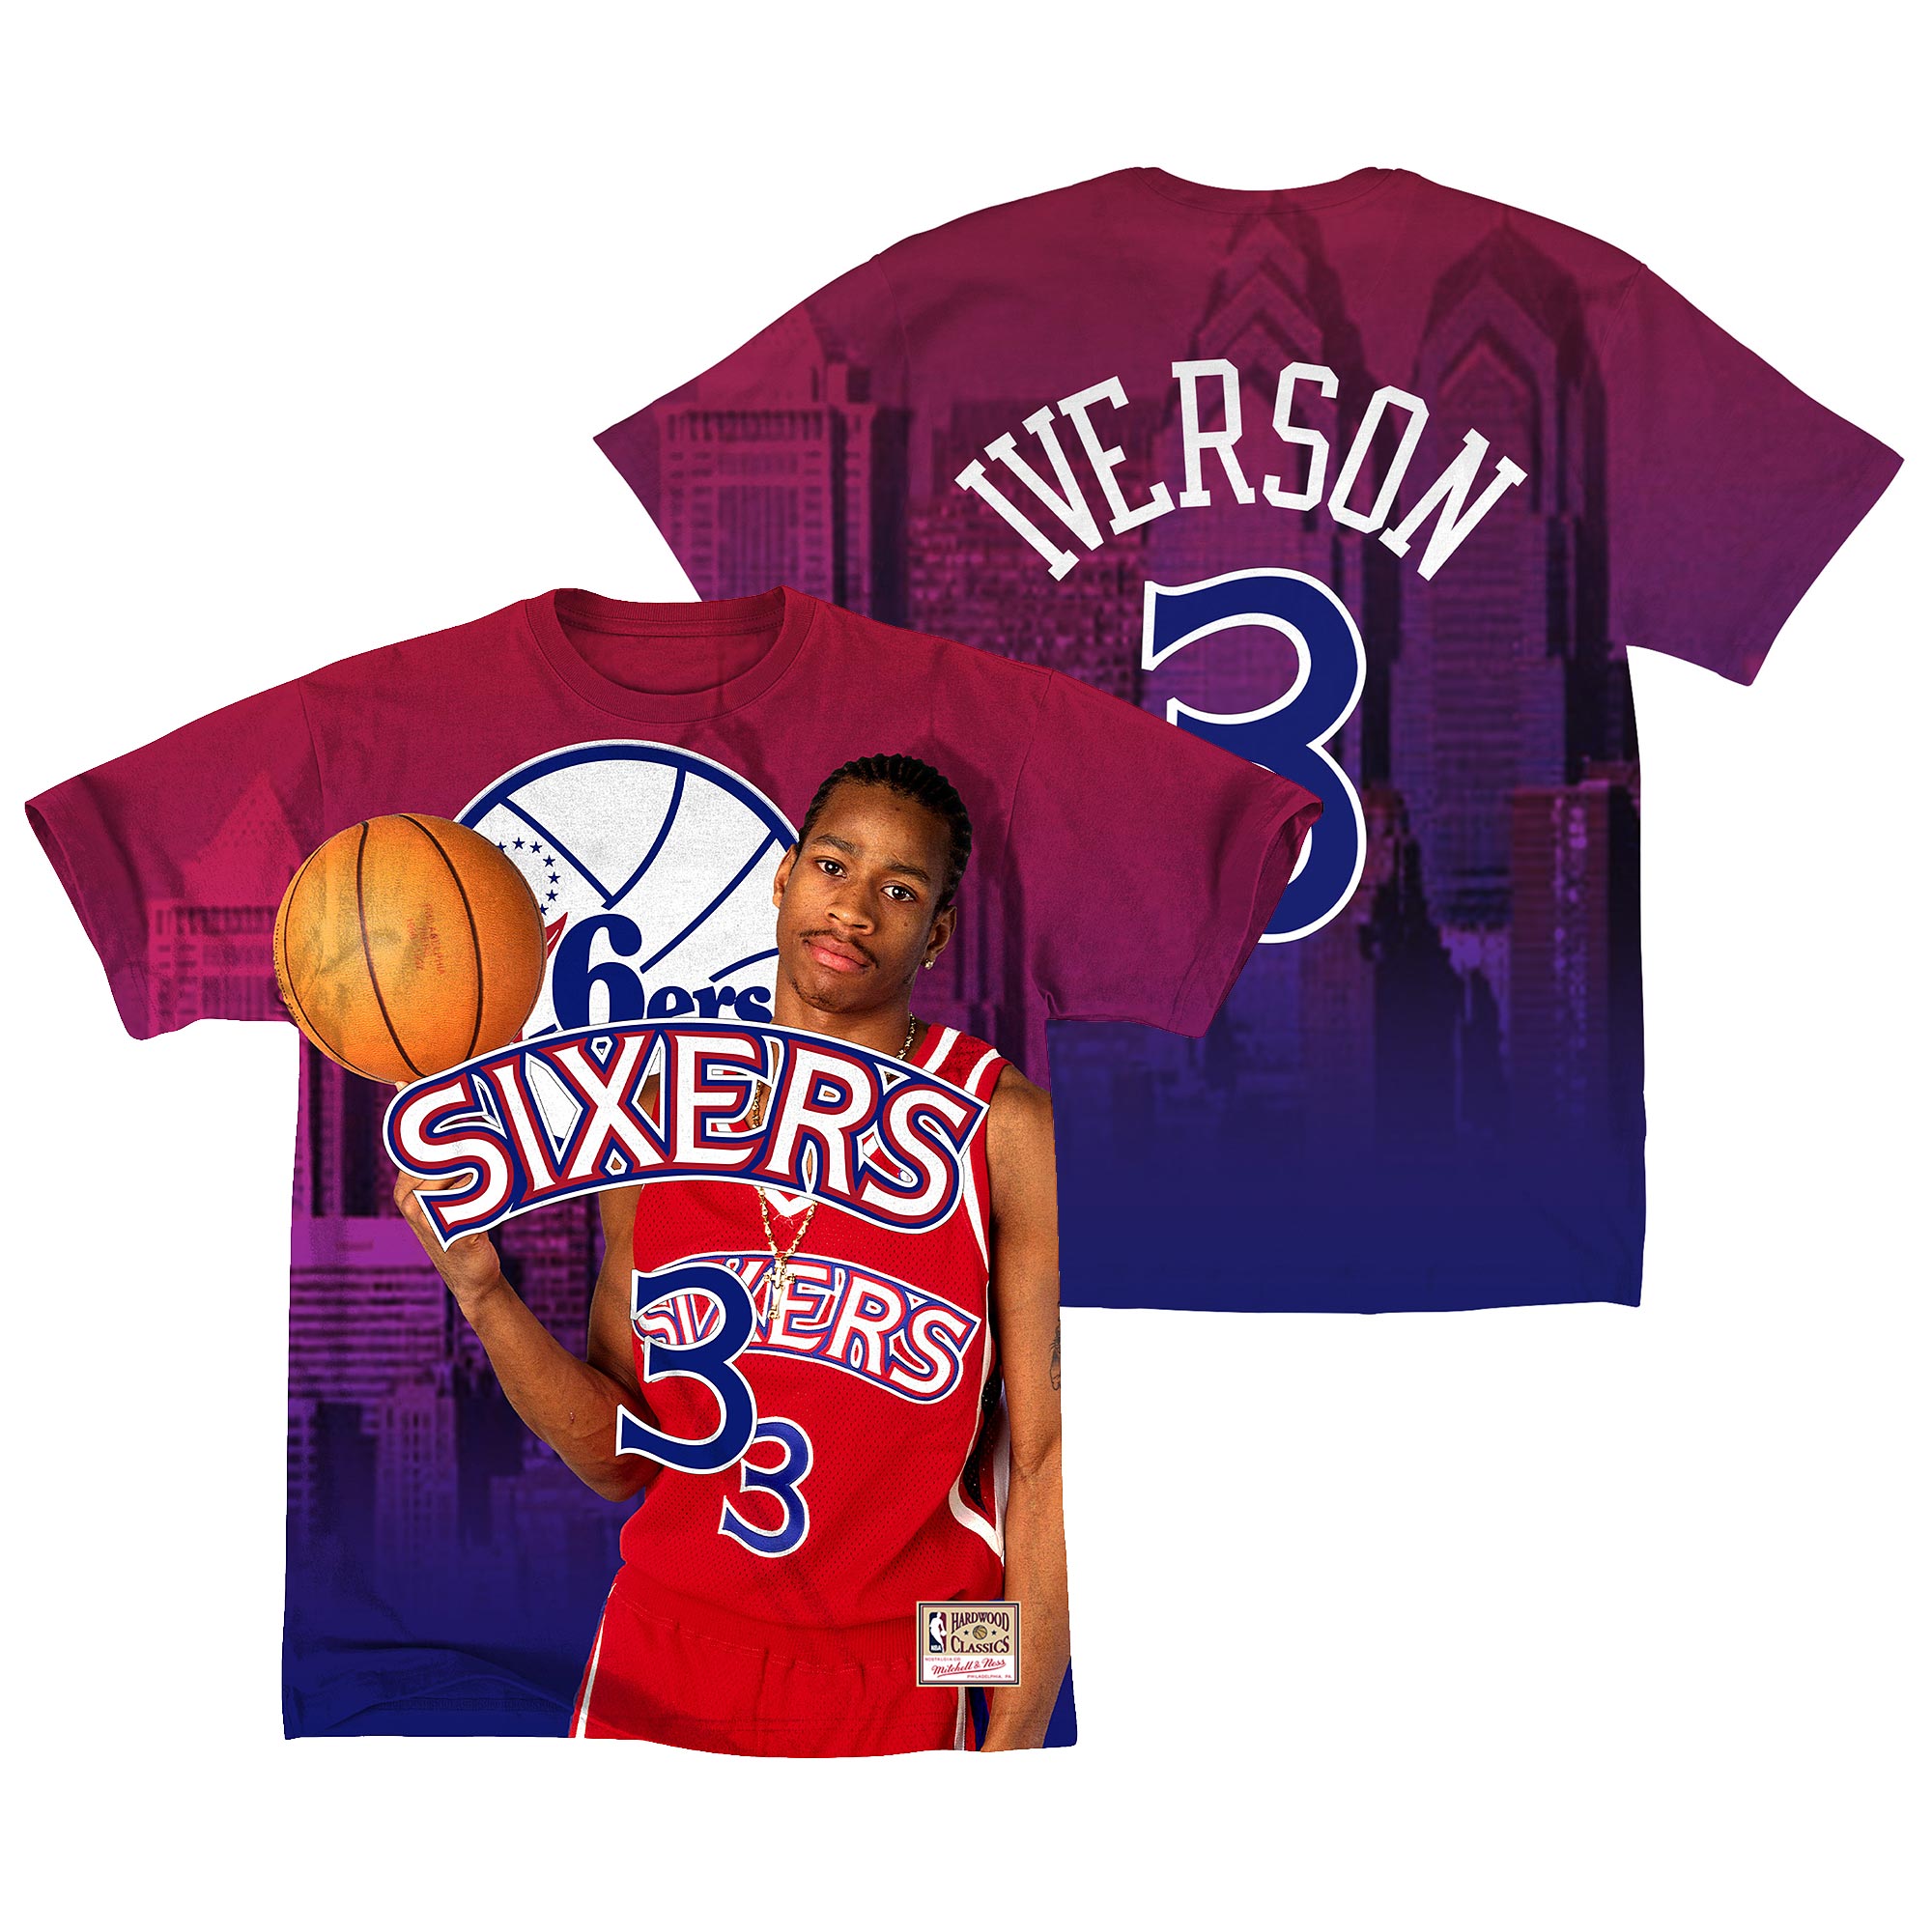 76ers iverson jersey